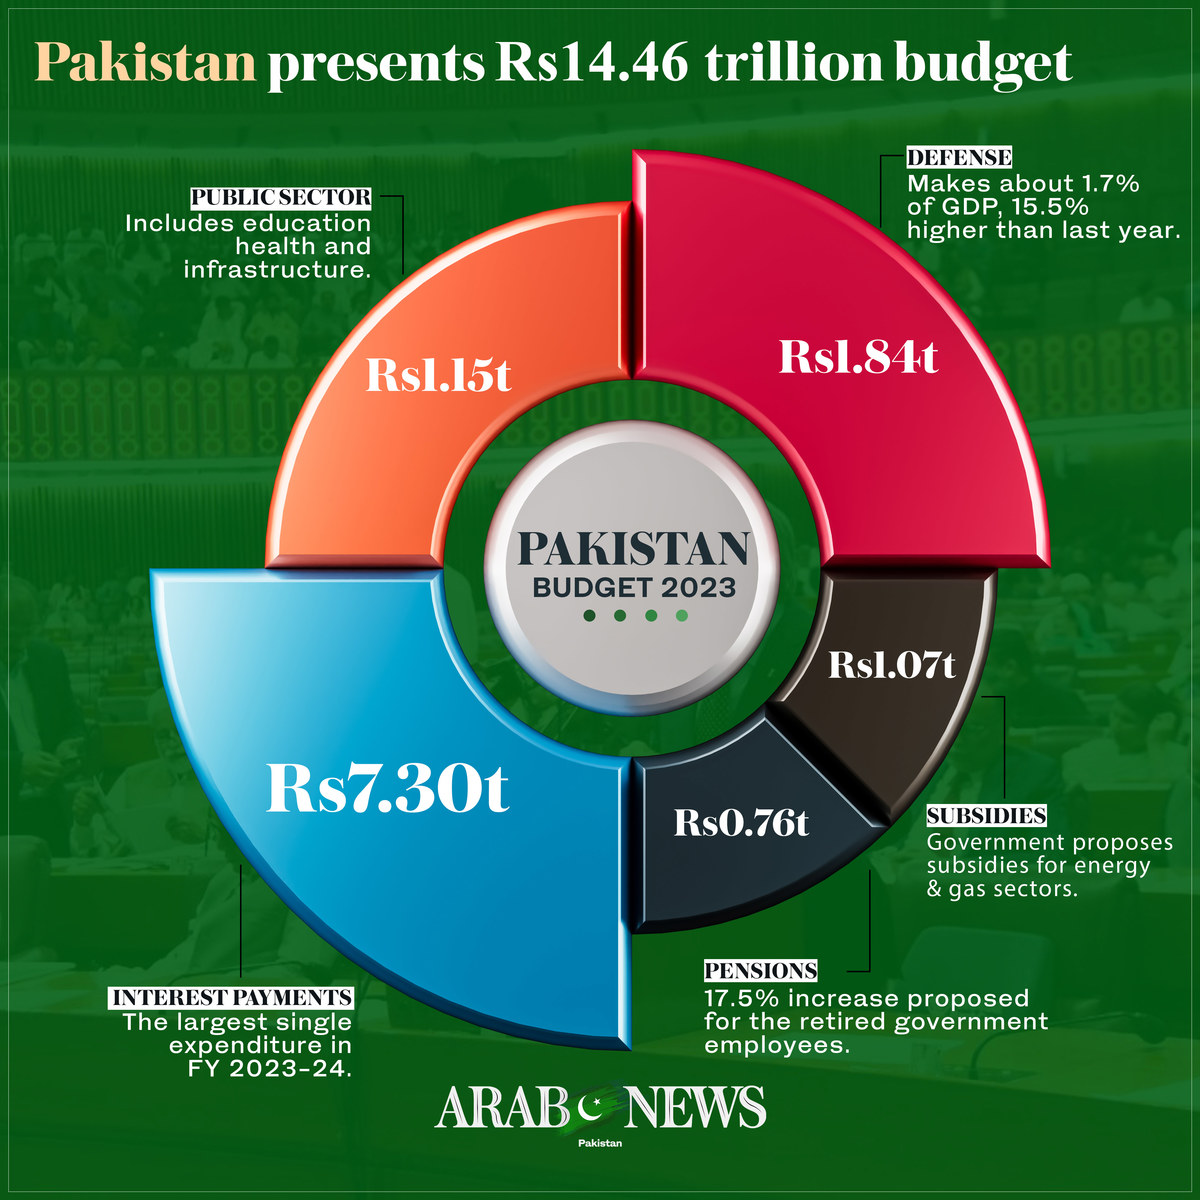 Experts and opposition slam Pakistan’s budget for inflation and